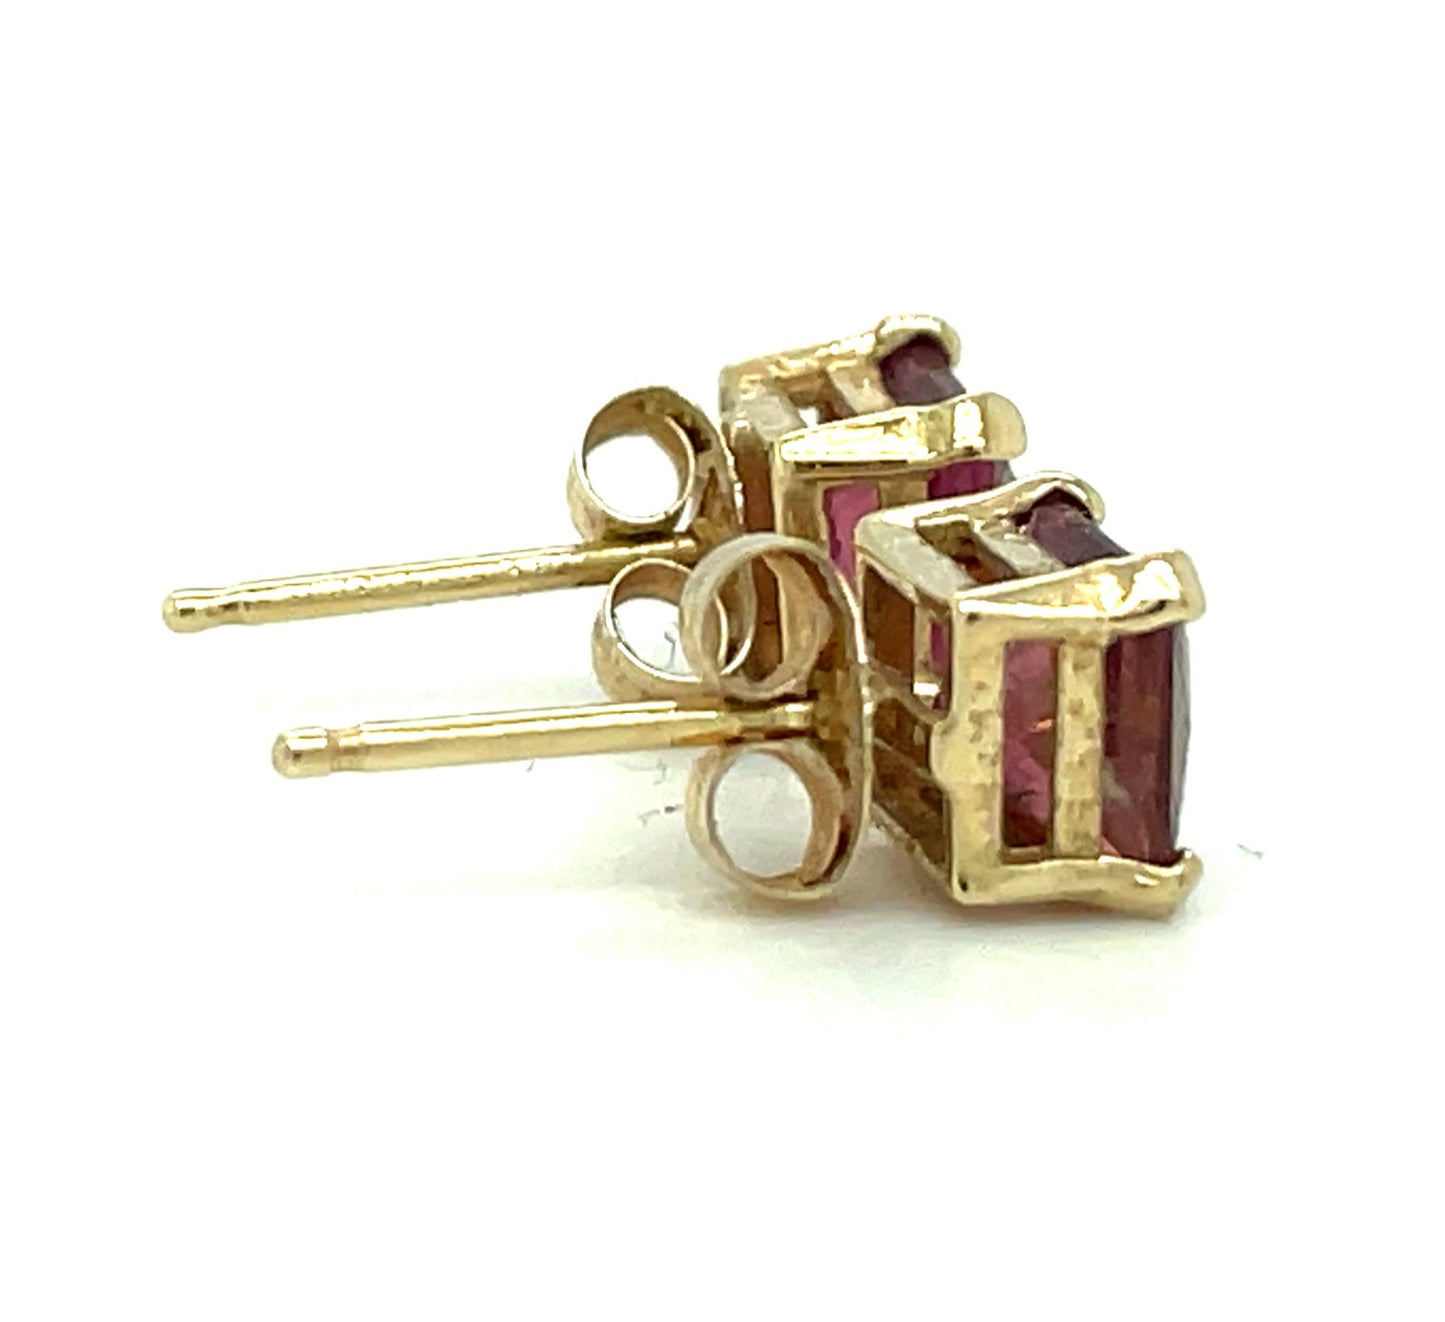 14k Yellow Gold and Garnet Stud Earrings Mexico .9 grams